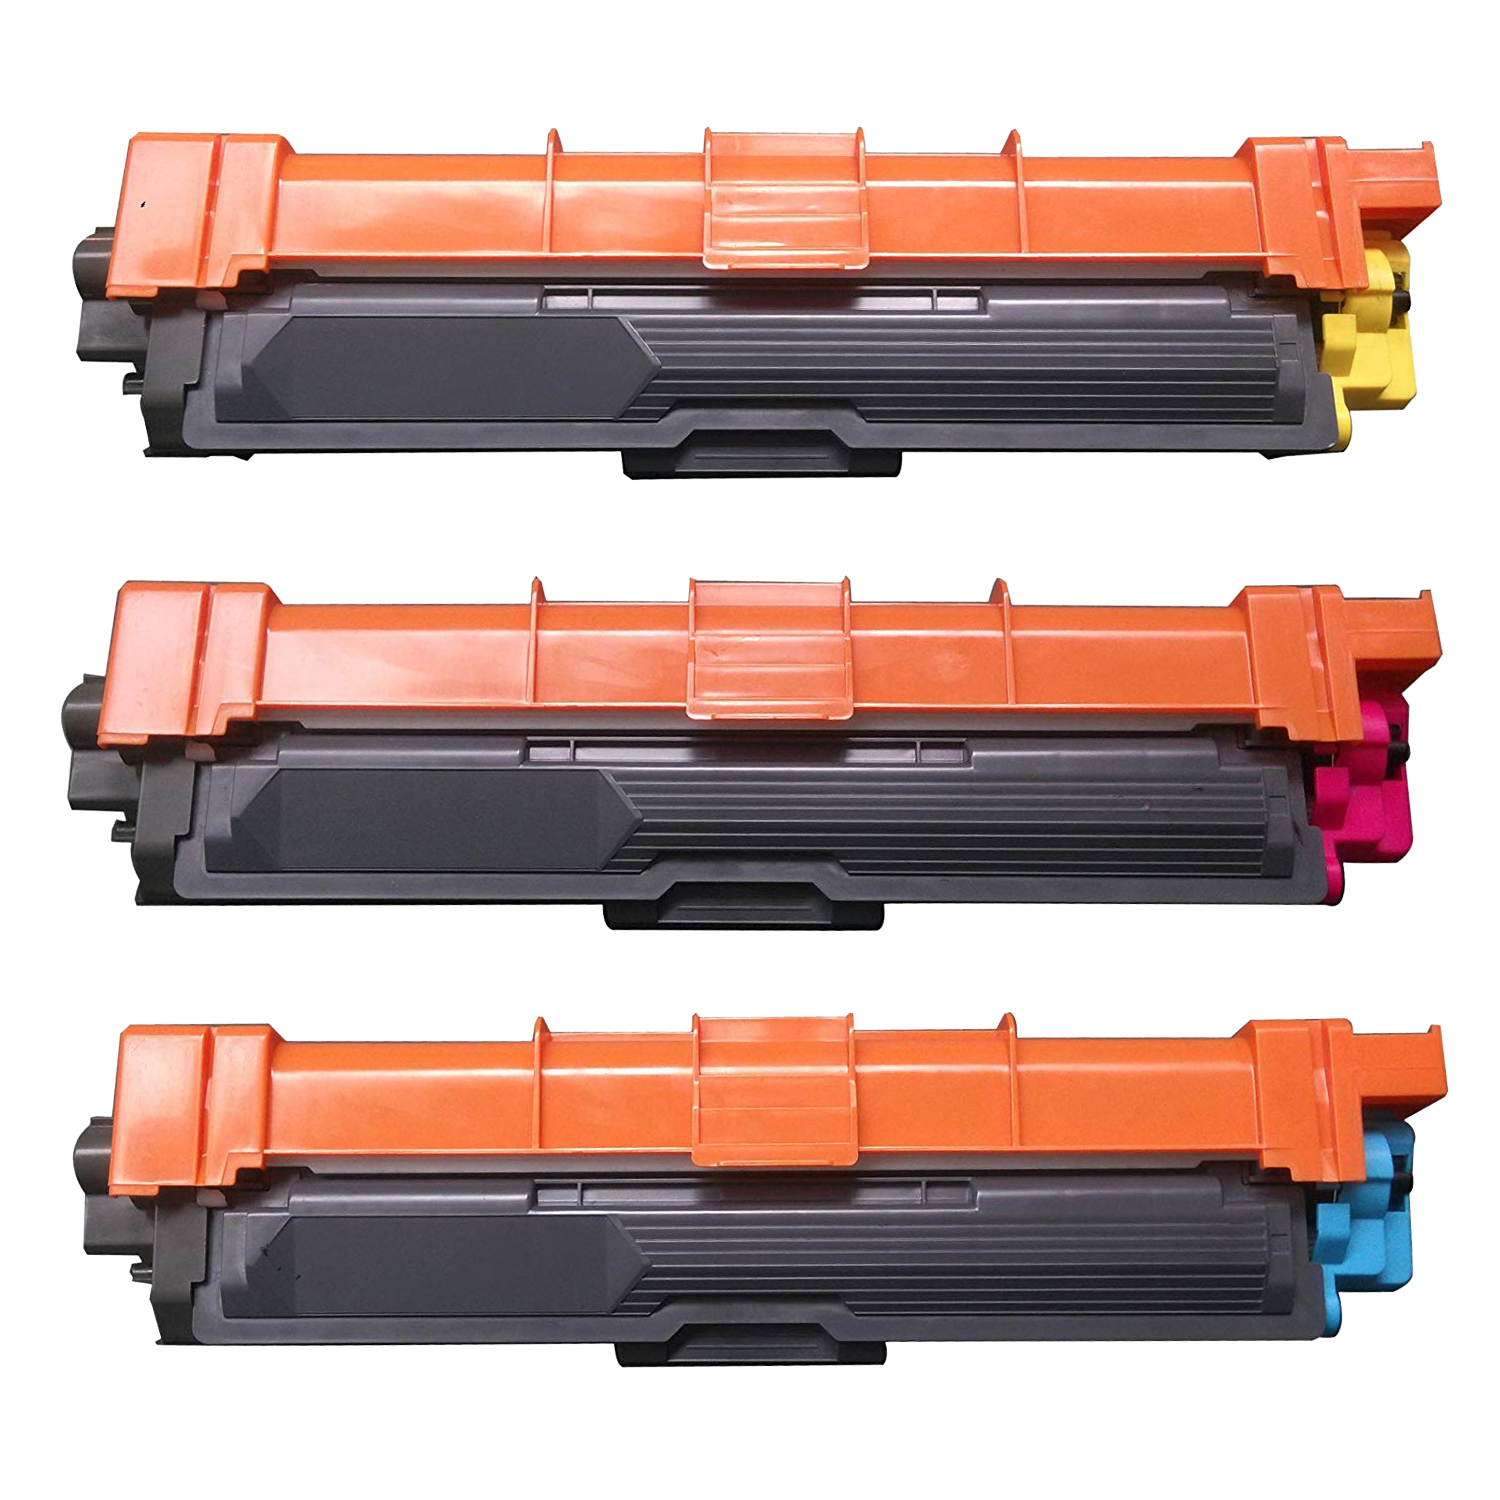 New Delivery for Science Pocket Calculator - Compatible CMY Toner Cartridge TN241 for Brother Printer HL3150/3170/DCP9020/MFC9340/9140 – TIANSE